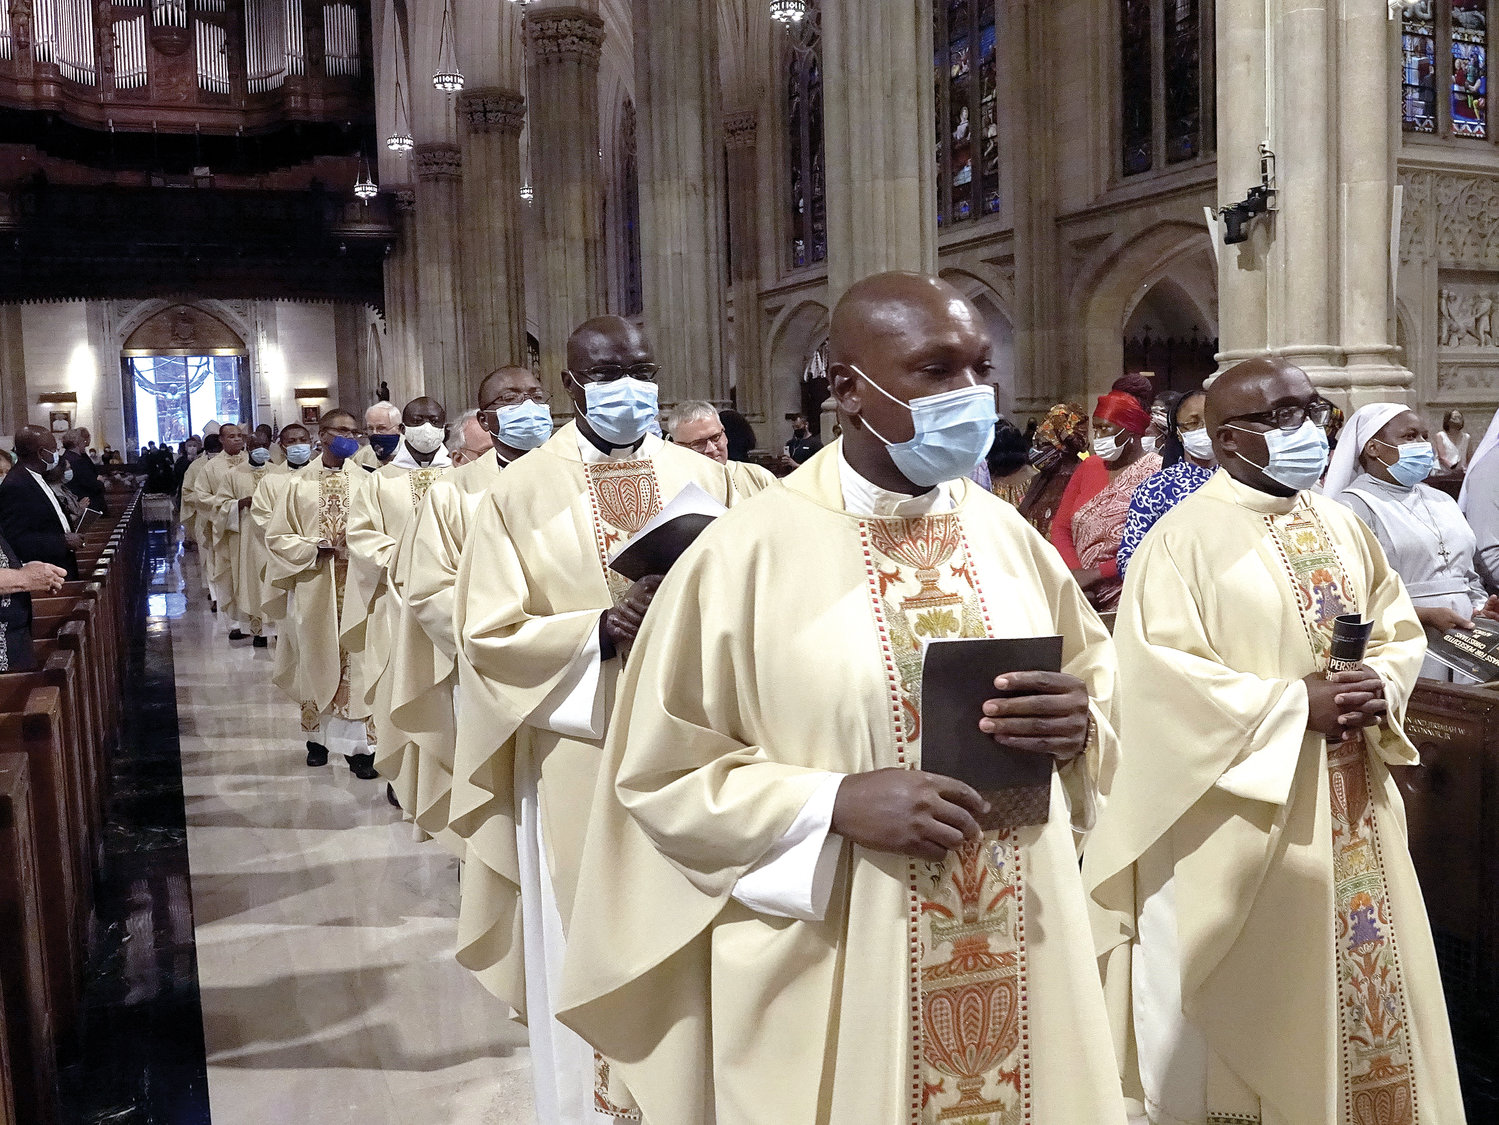 The Mass for Persecuted Christians in Africa was celebrated by Cardinal Dolan at St. Patrick’s Cathedral Sept. 9.